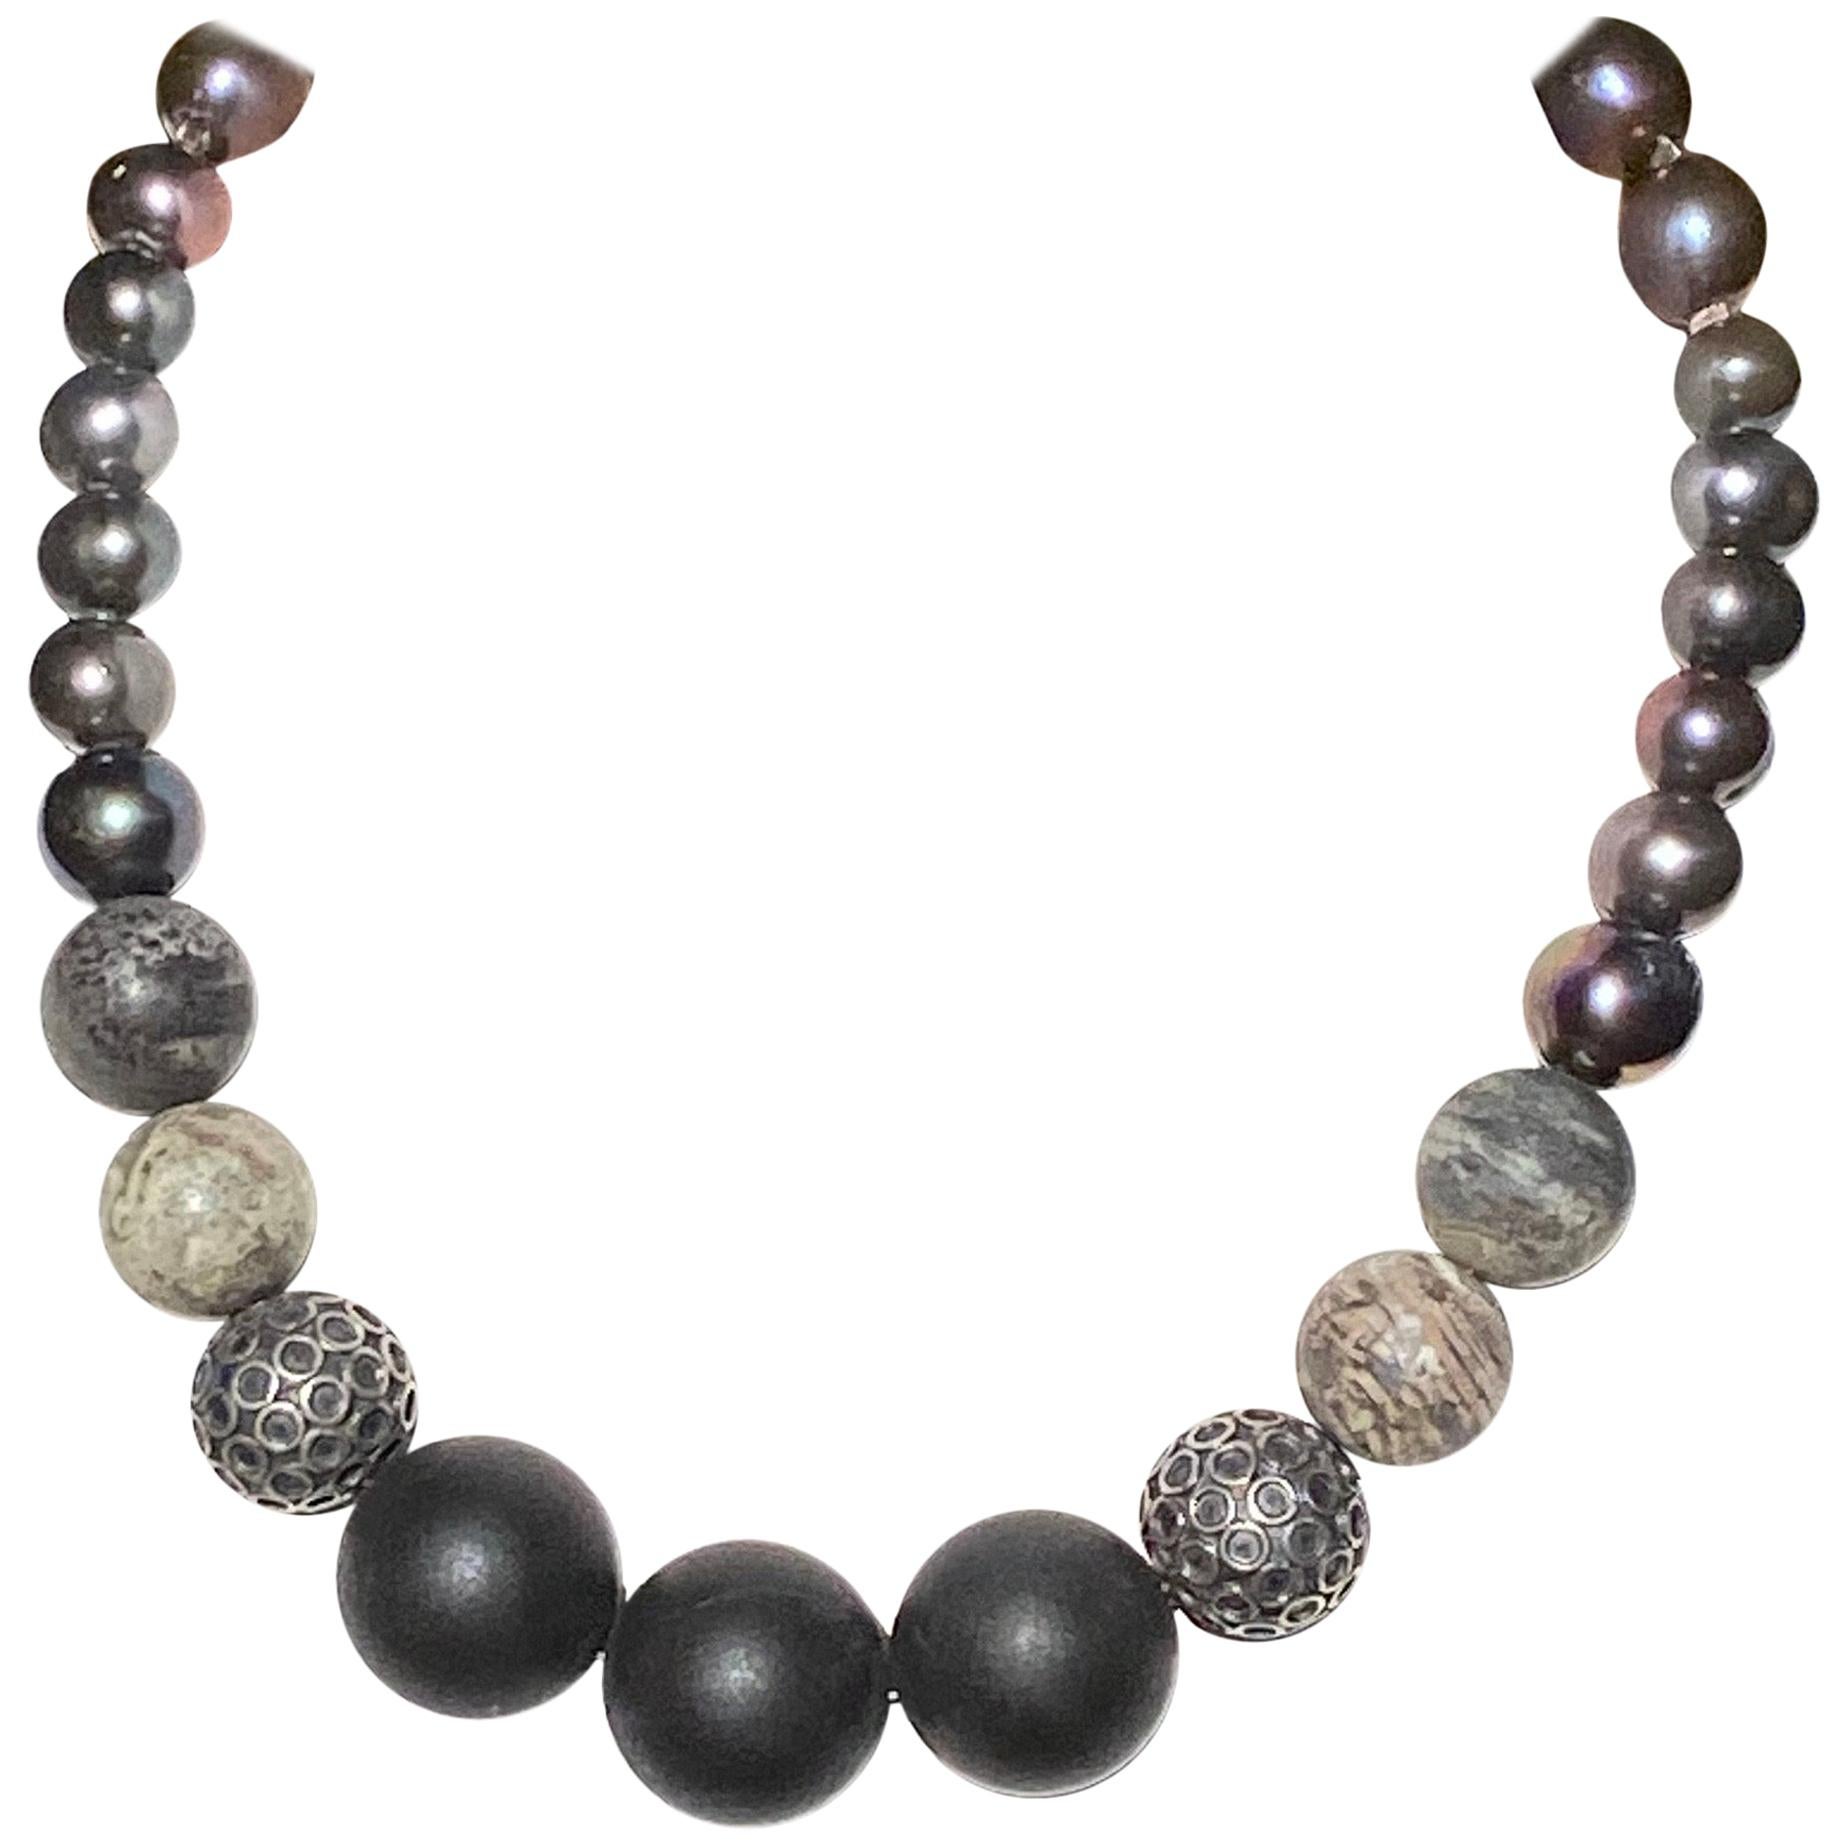 Black & Gray FWCP Pearls with Black Onyx Beads in a Small Choker Silver Necklace For Sale